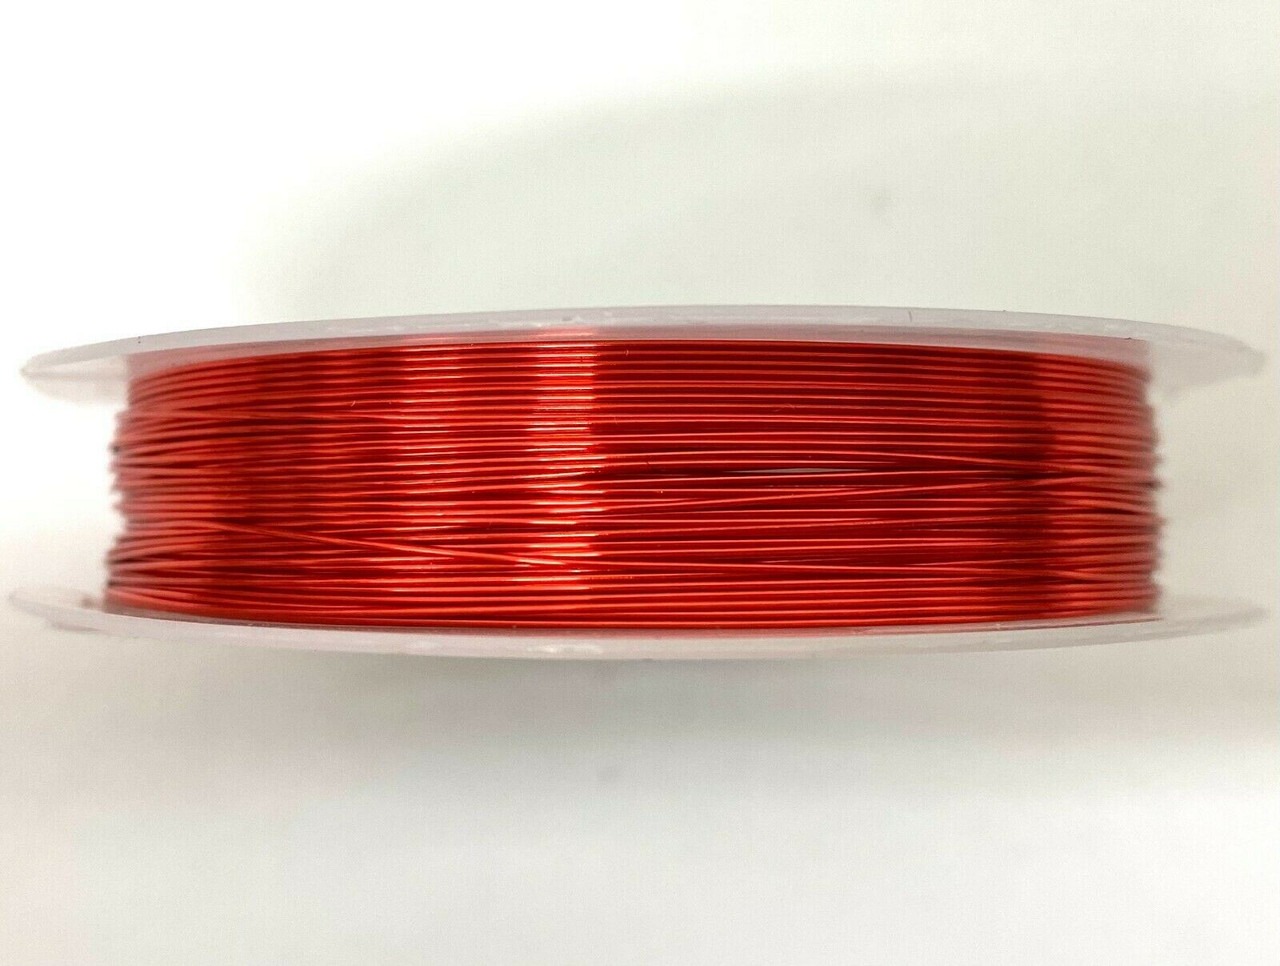 Roll of Copper Wire, 0.8mm thickness, RED colour, approx 4m length